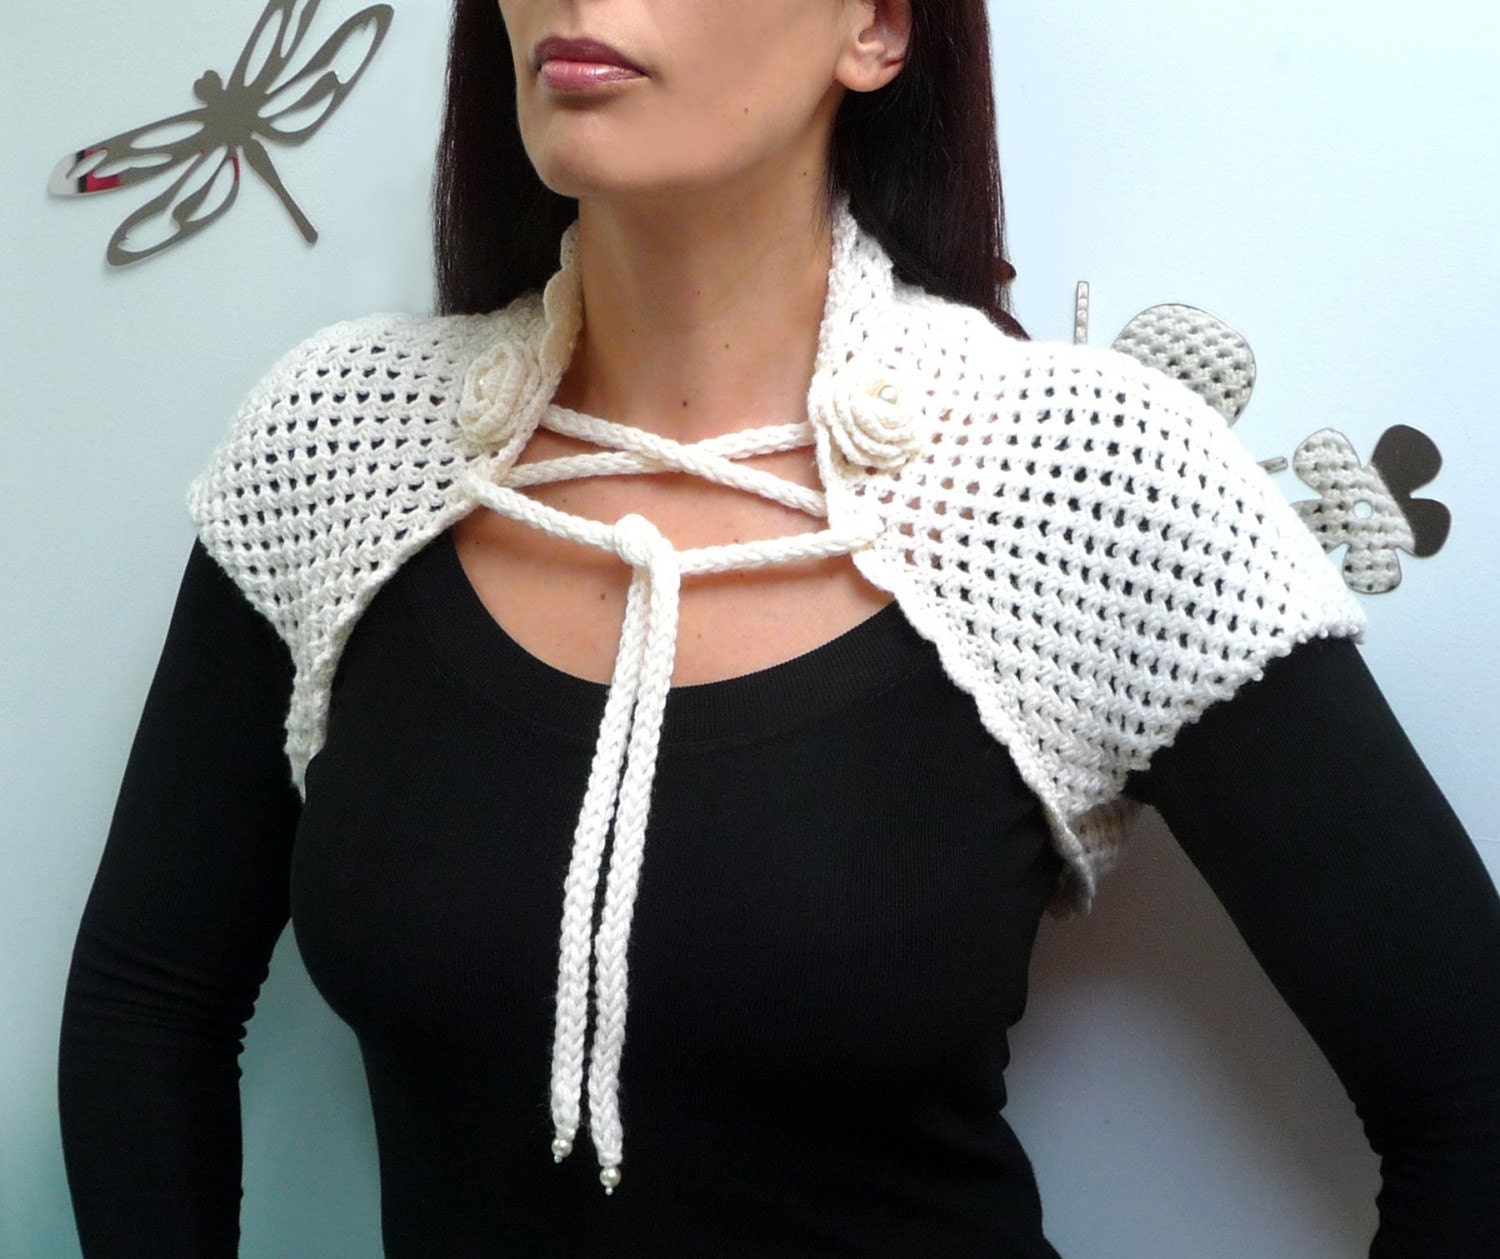 Crochet Shrug - Ask Jeeves - Ask.com - What&apos;s Your Question?